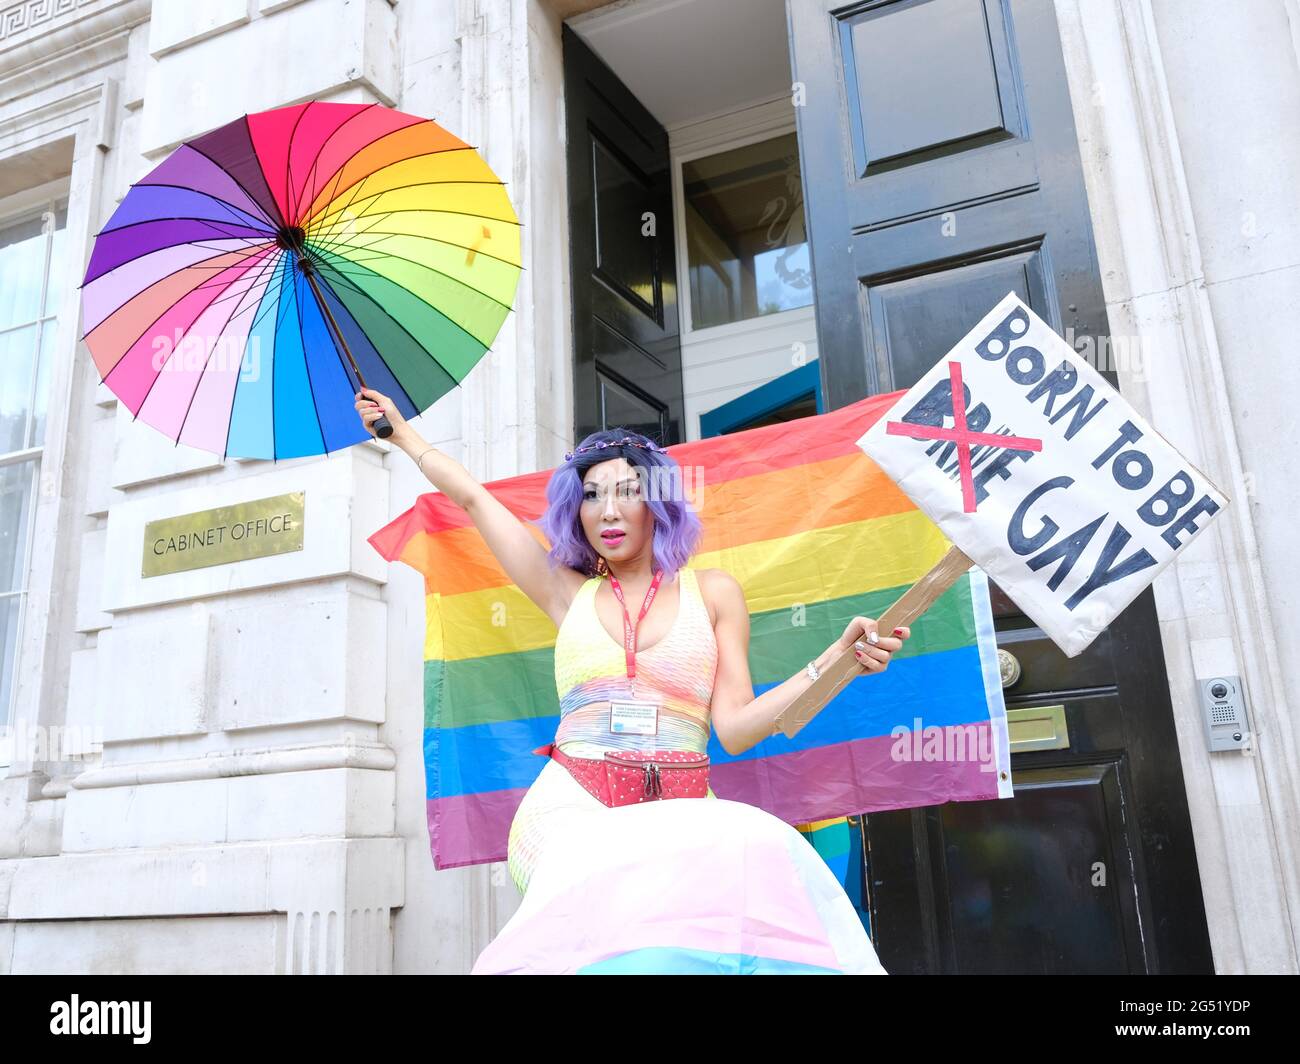 Activists gather to deliver a petition to the Cabinet Office demanding the government fulfils its promise to ban gay conversion therapy. Stock Photo